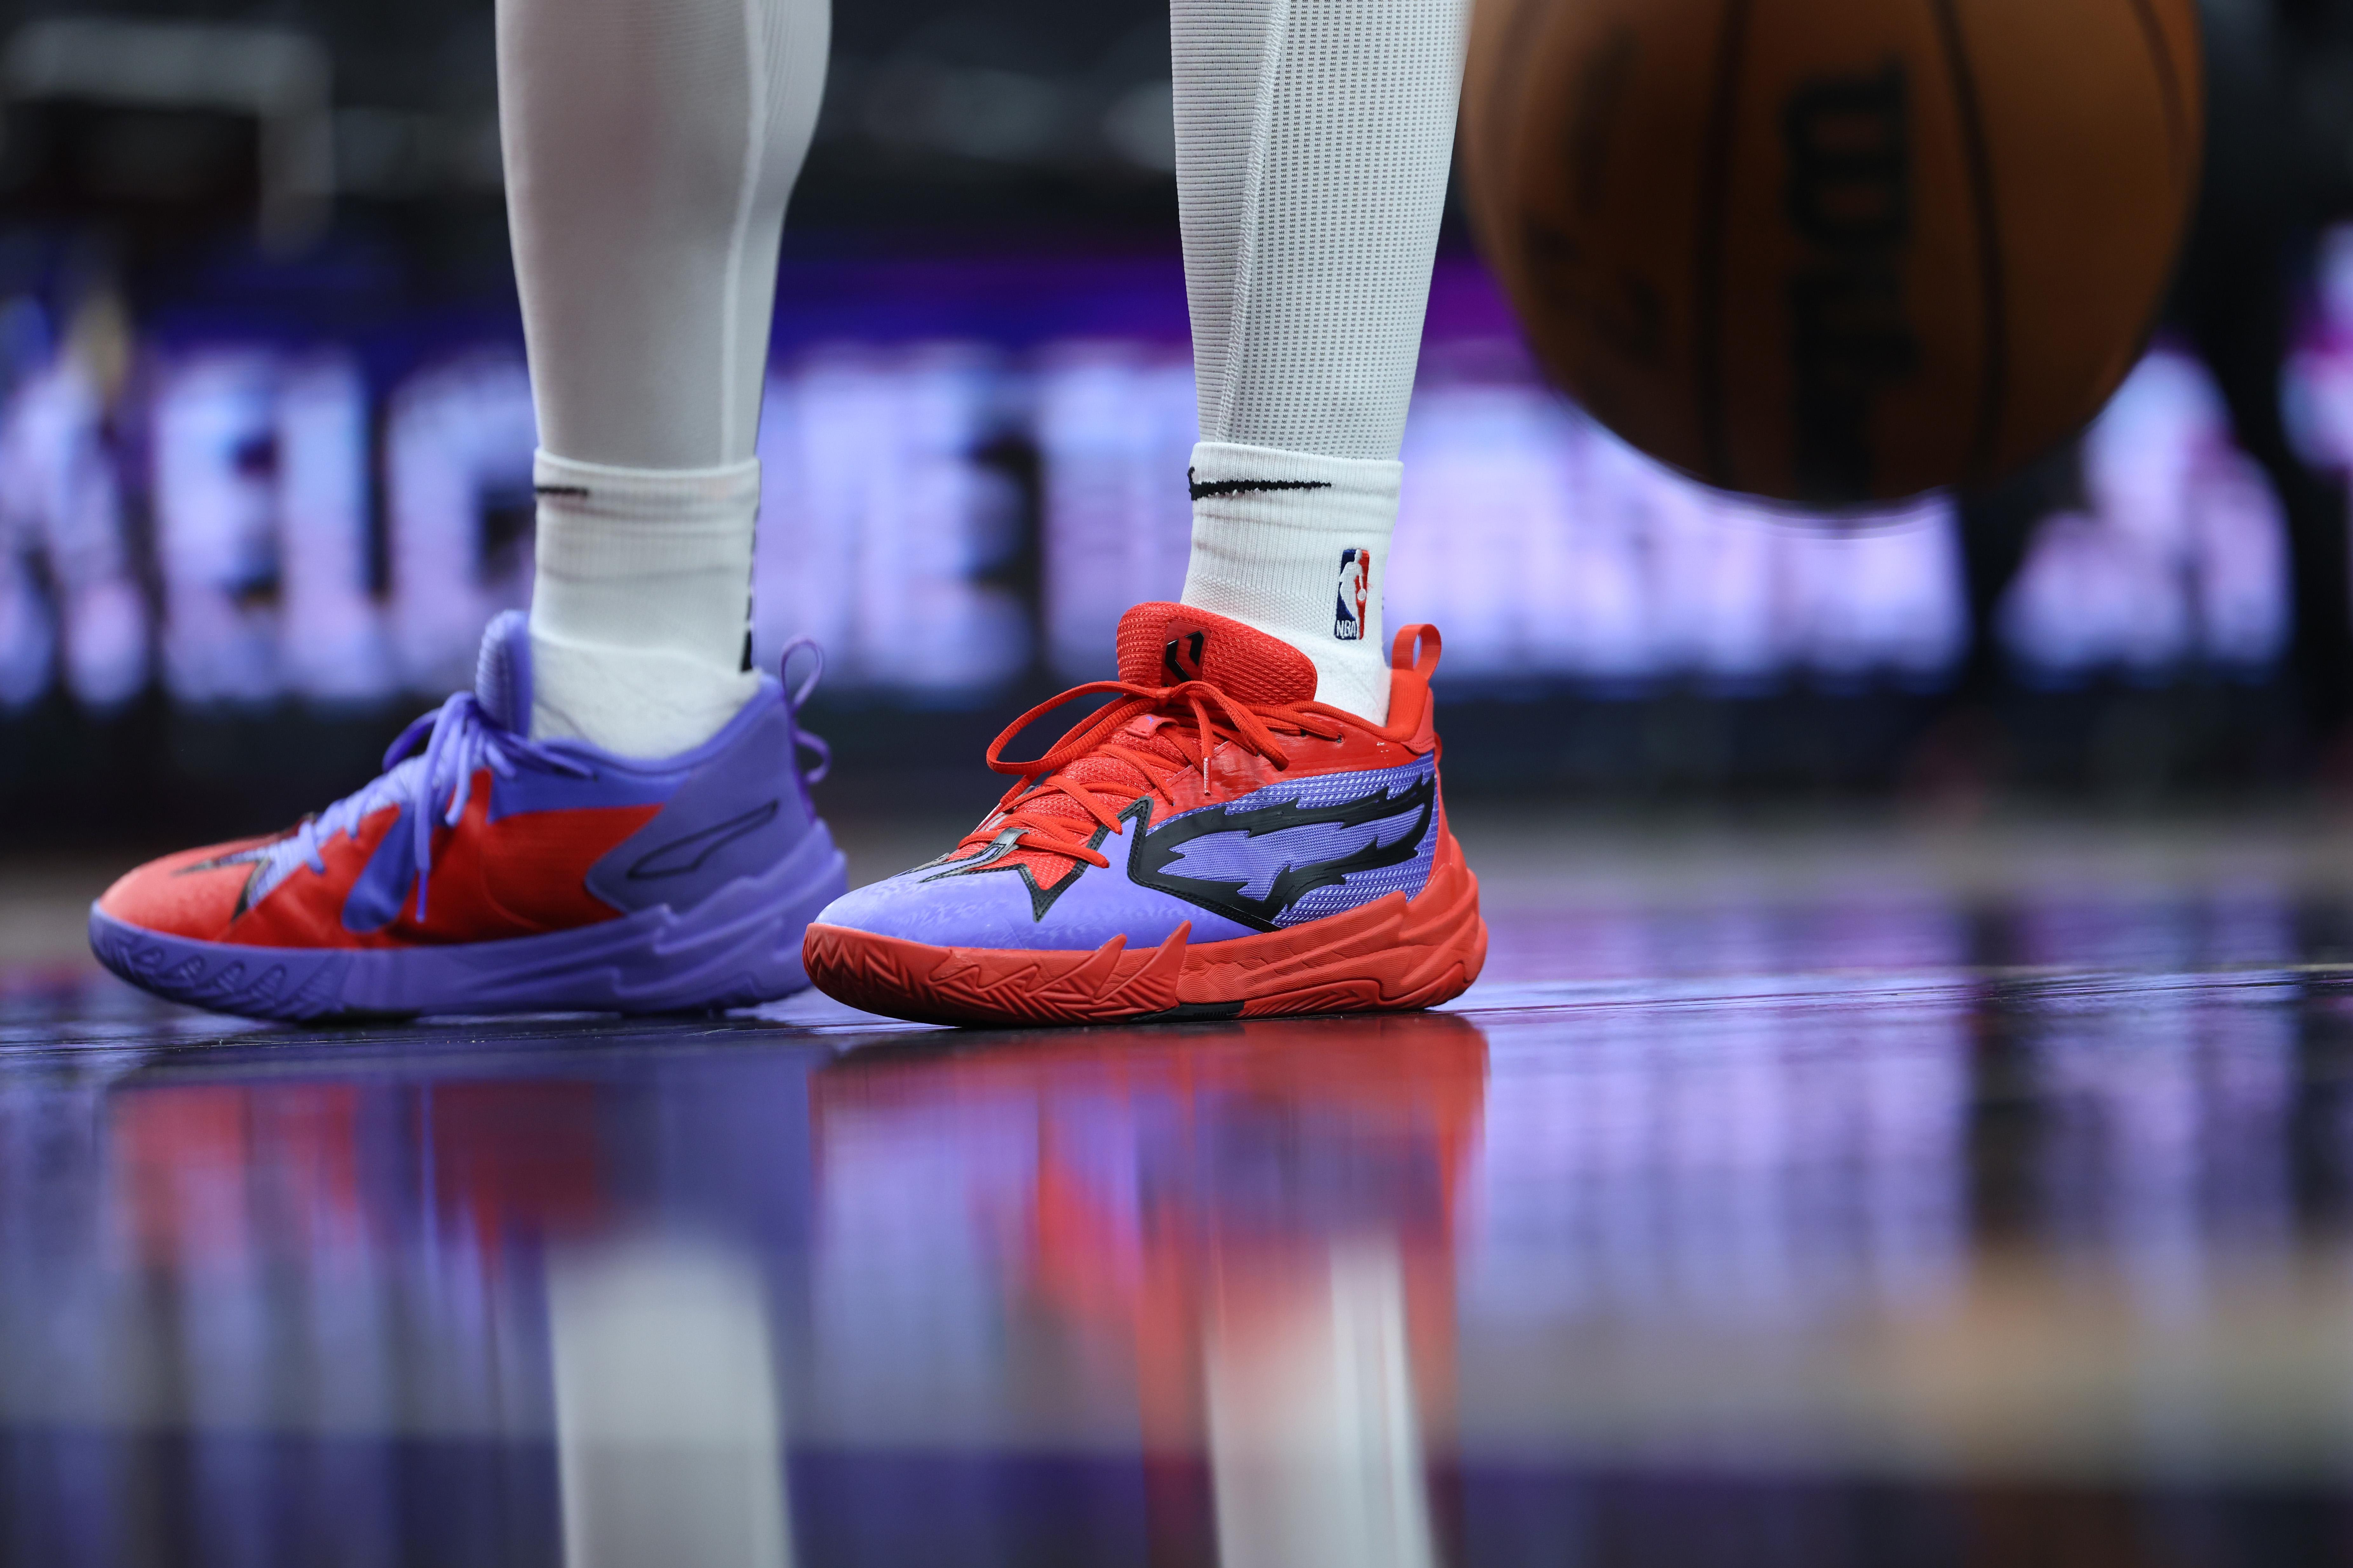 Portland Trail Blazers guard Scoot Henderson's red and blue PUMA sneakers.